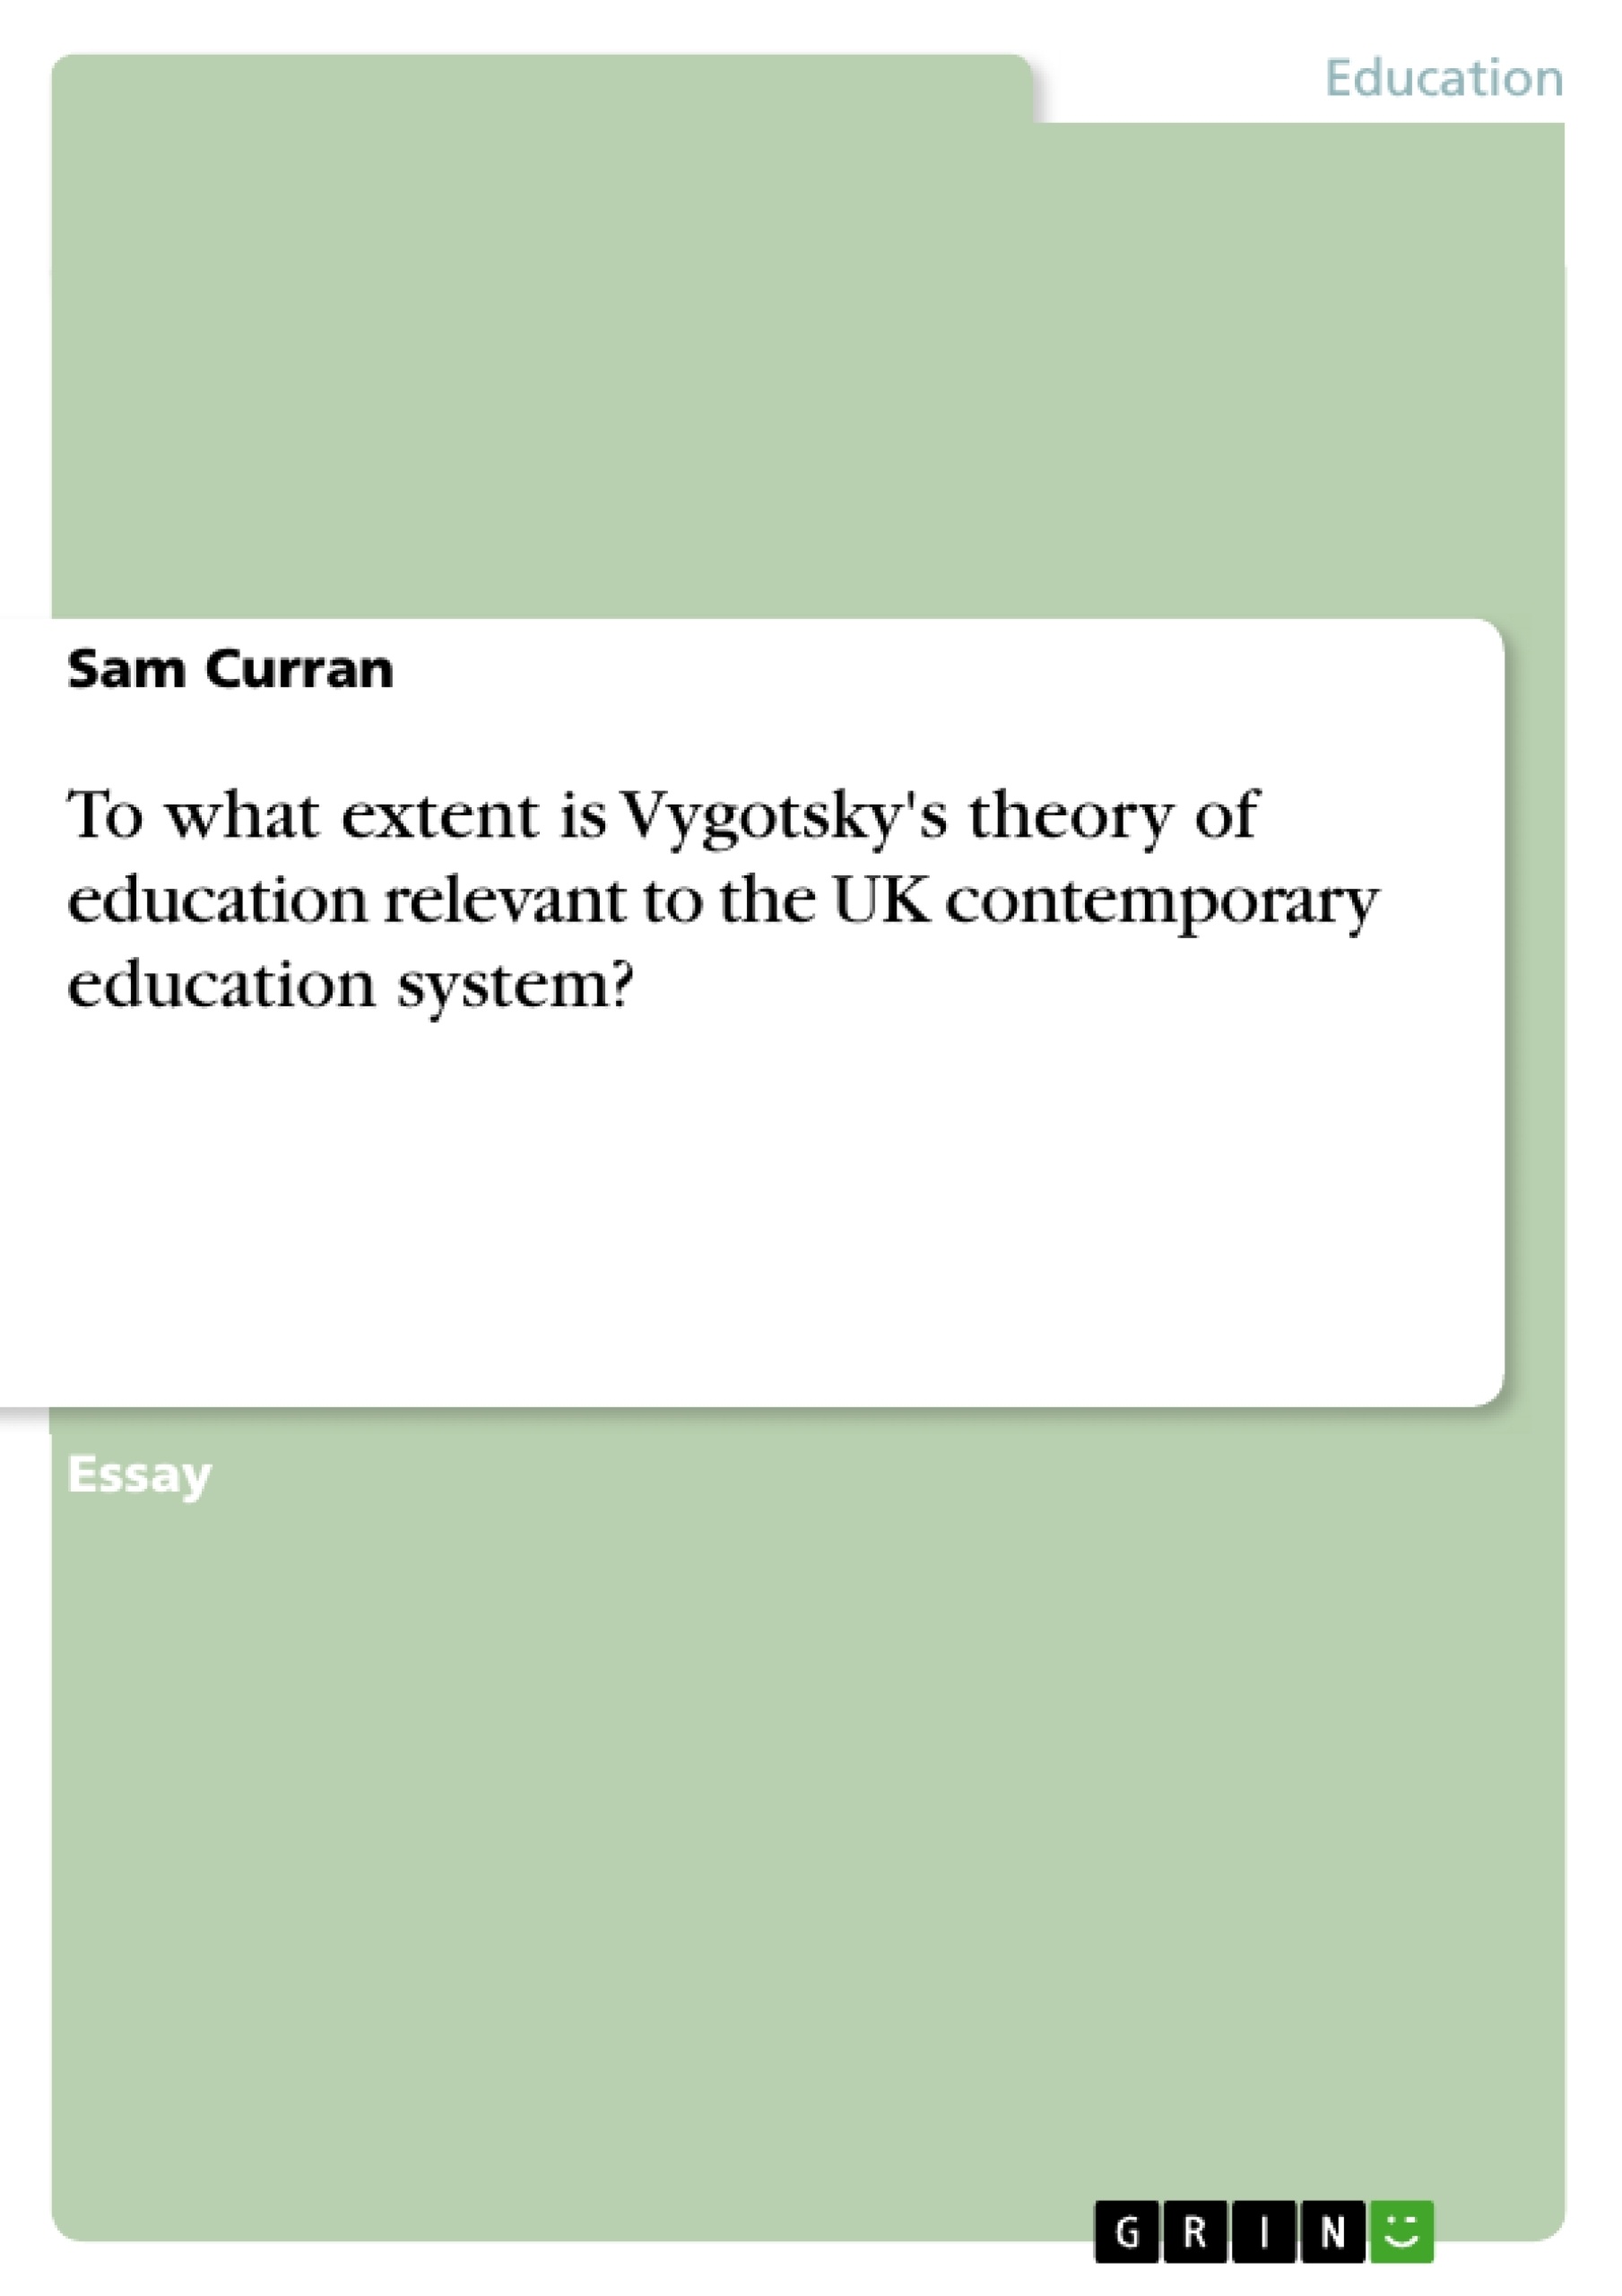 Título: To what extent is Vygotsky's theory of education relevant to the UK contemporary education system?